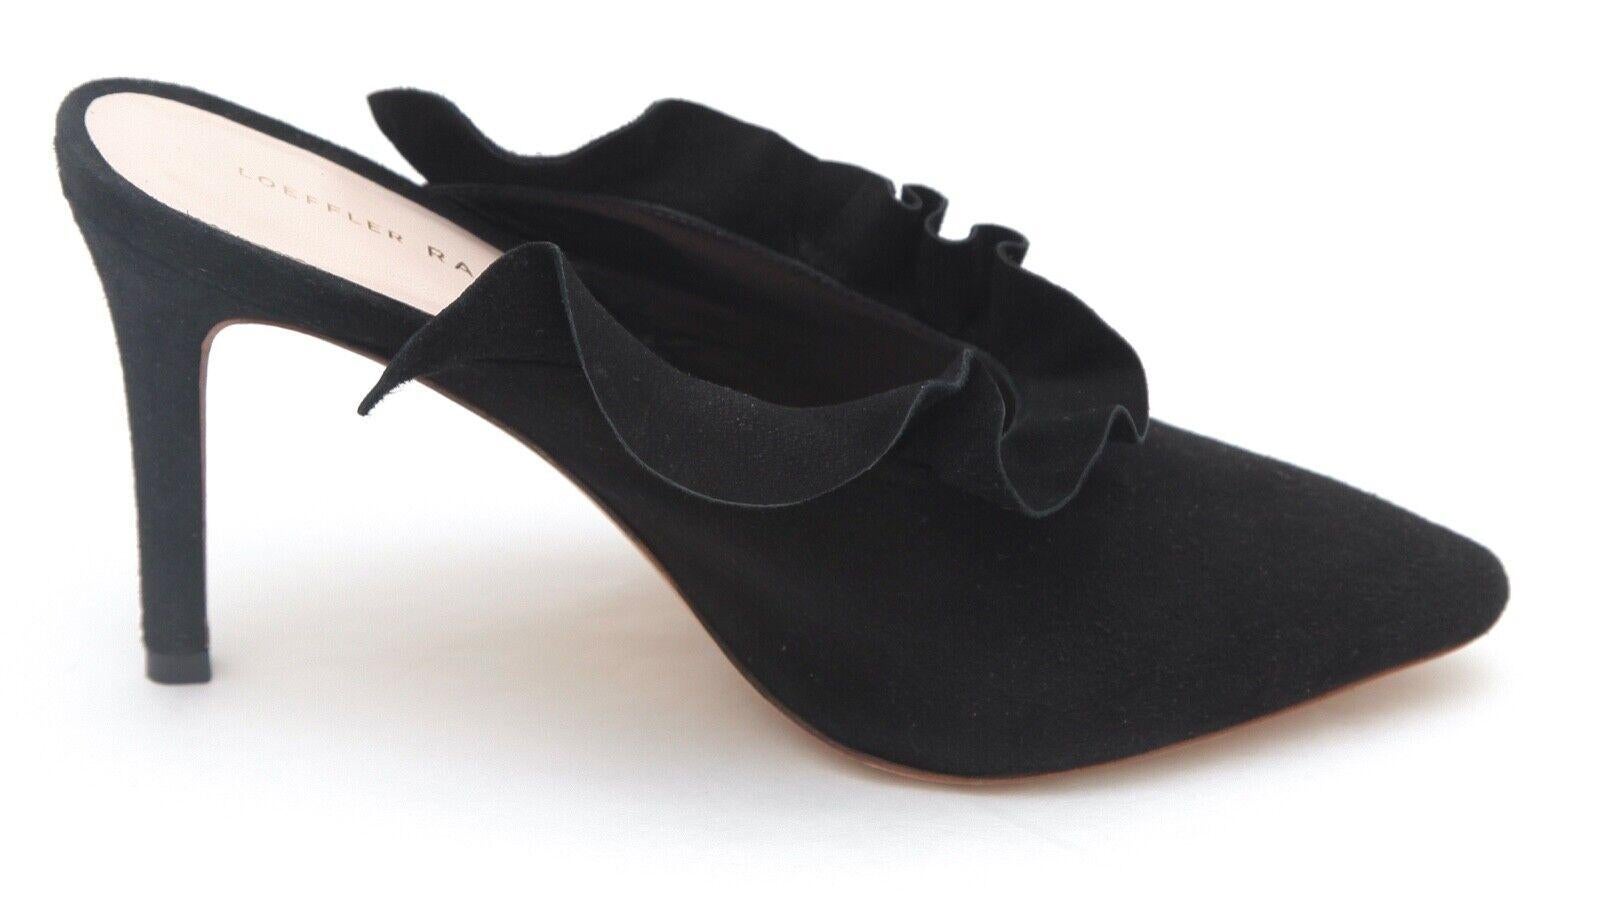 GUARANTEED AUTHENTIC LOEFFLER RANDALL BLACK SUEDE MULES

Design:
- Black suede uppers.
- Ruffles around opening.
- Pointed toe.
- Self-covered heel.
- Leather insole and sole.
- Packaged carefully, dust bag not available.

Size: 7.5B

Measurements